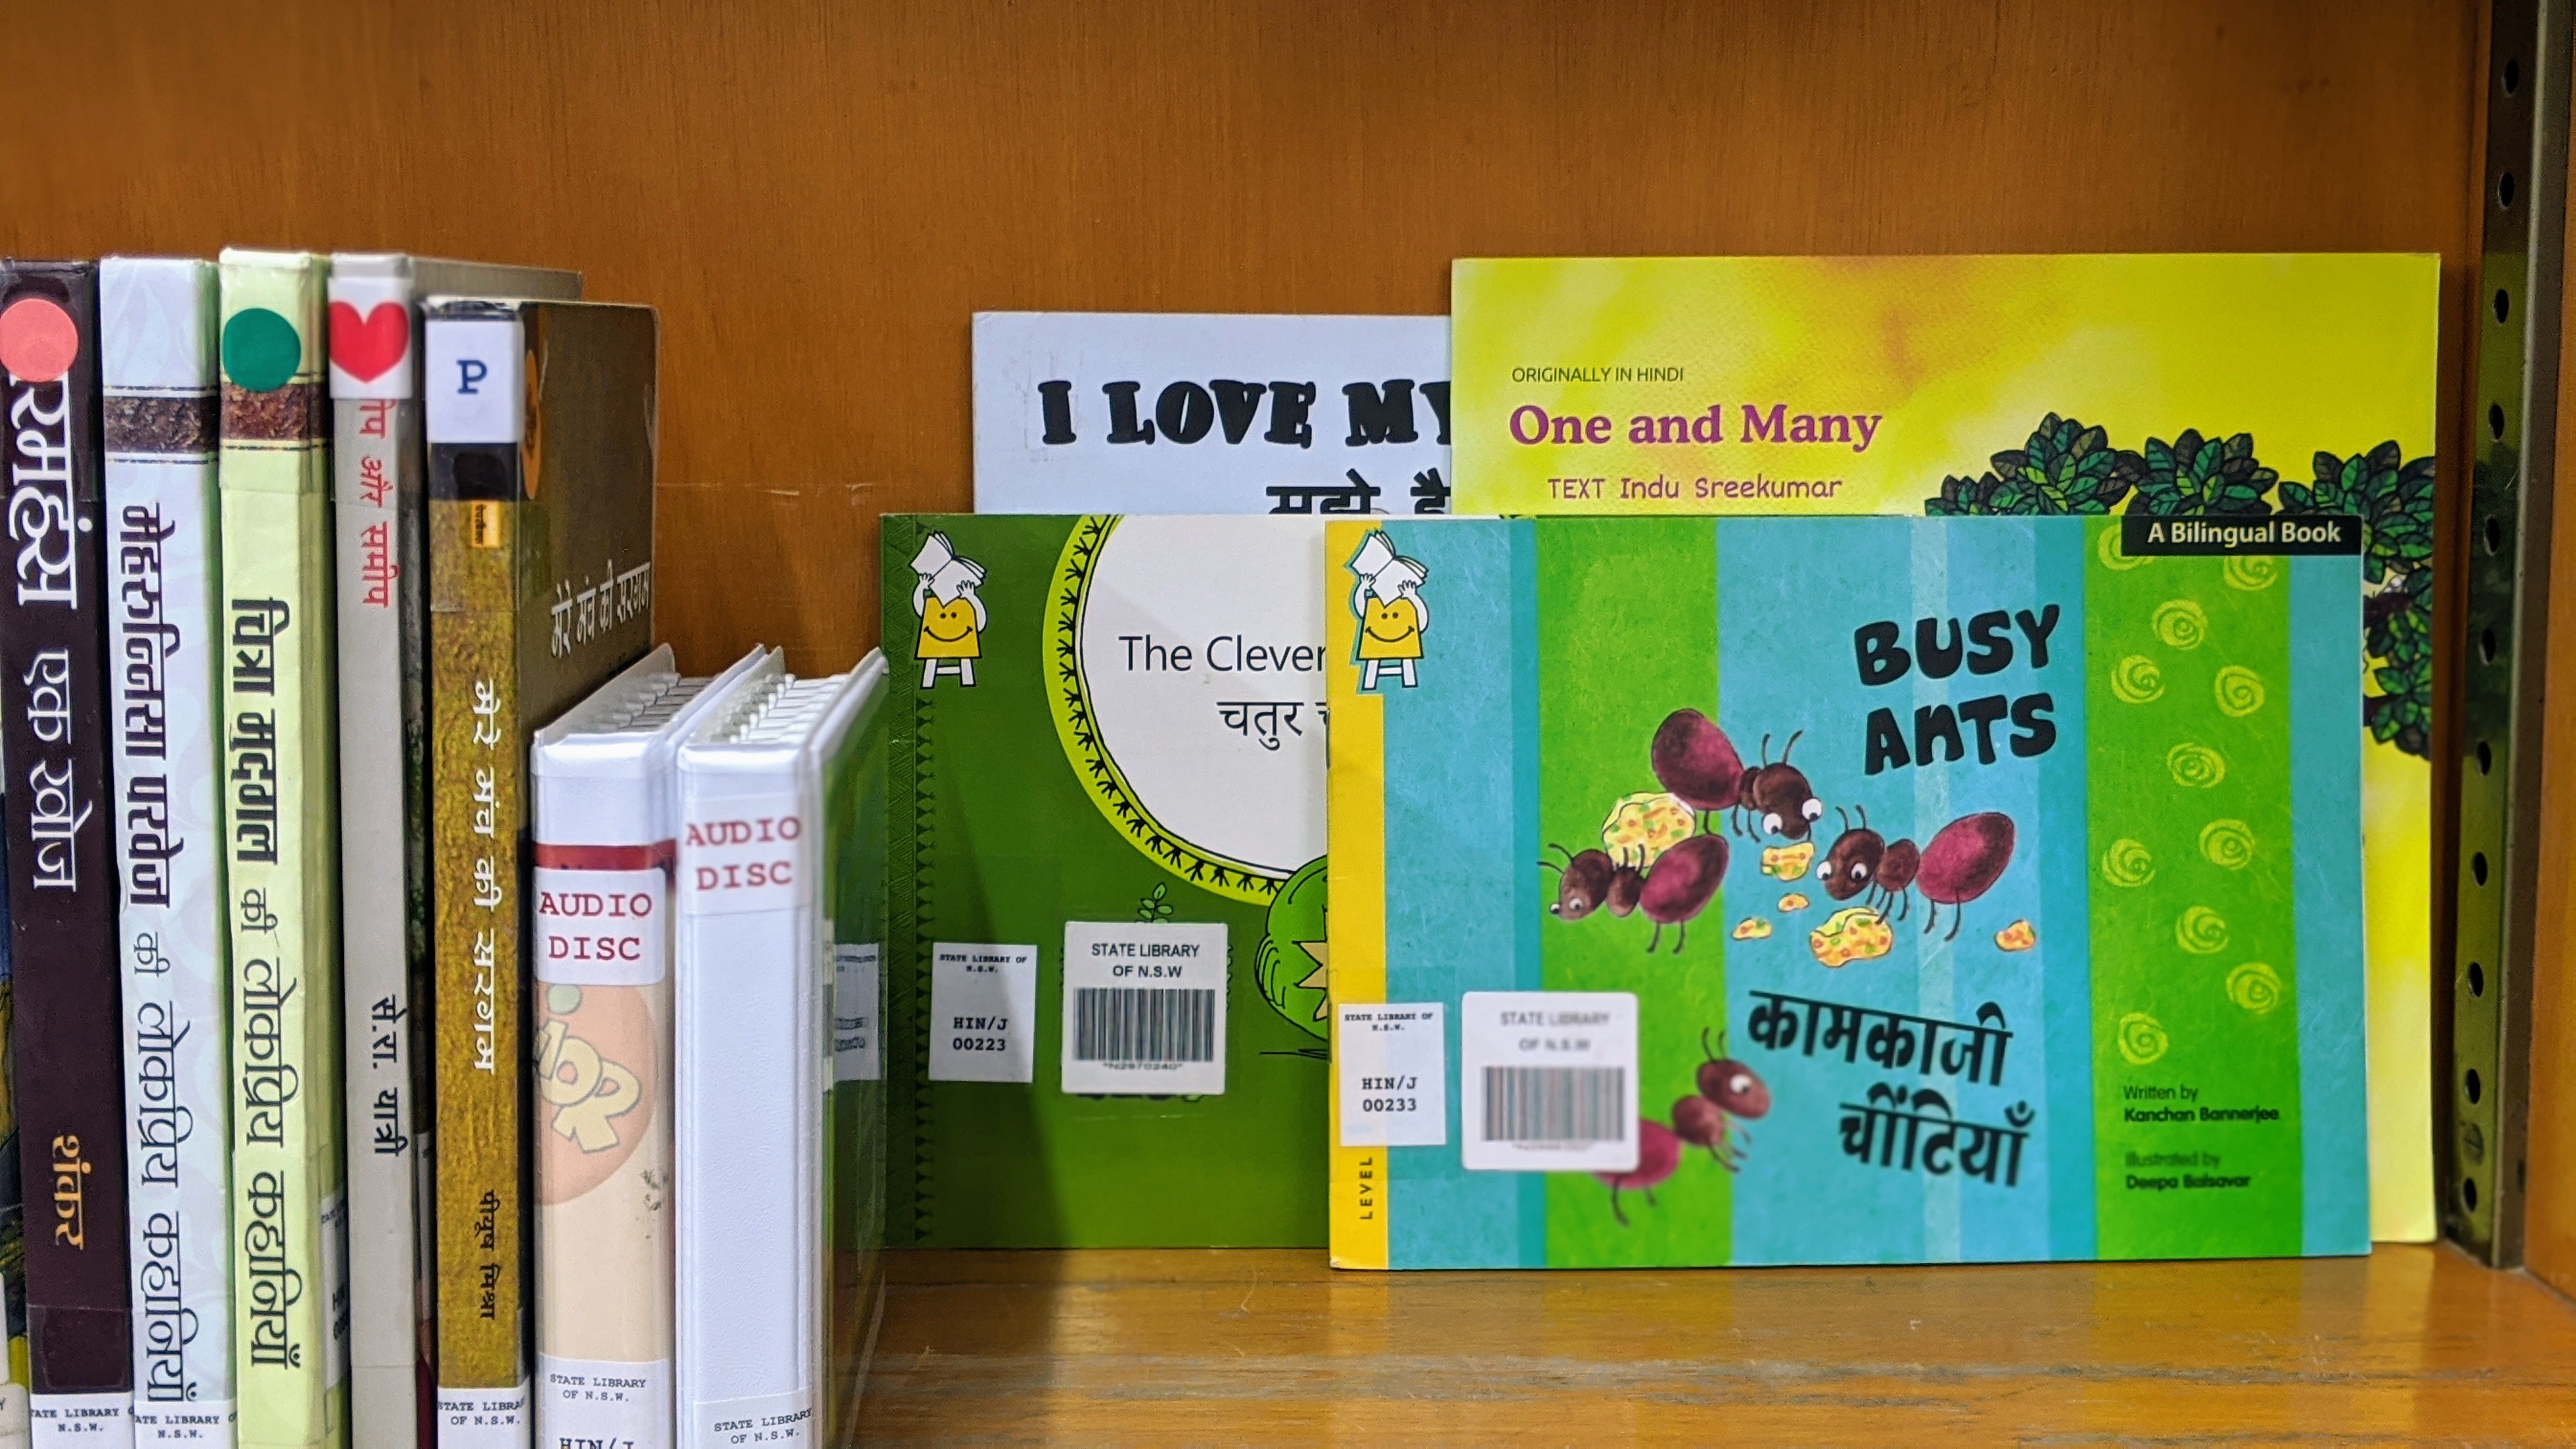 Photo of the Hindi books on the shelf, spine view except the thin childrens books are face out.